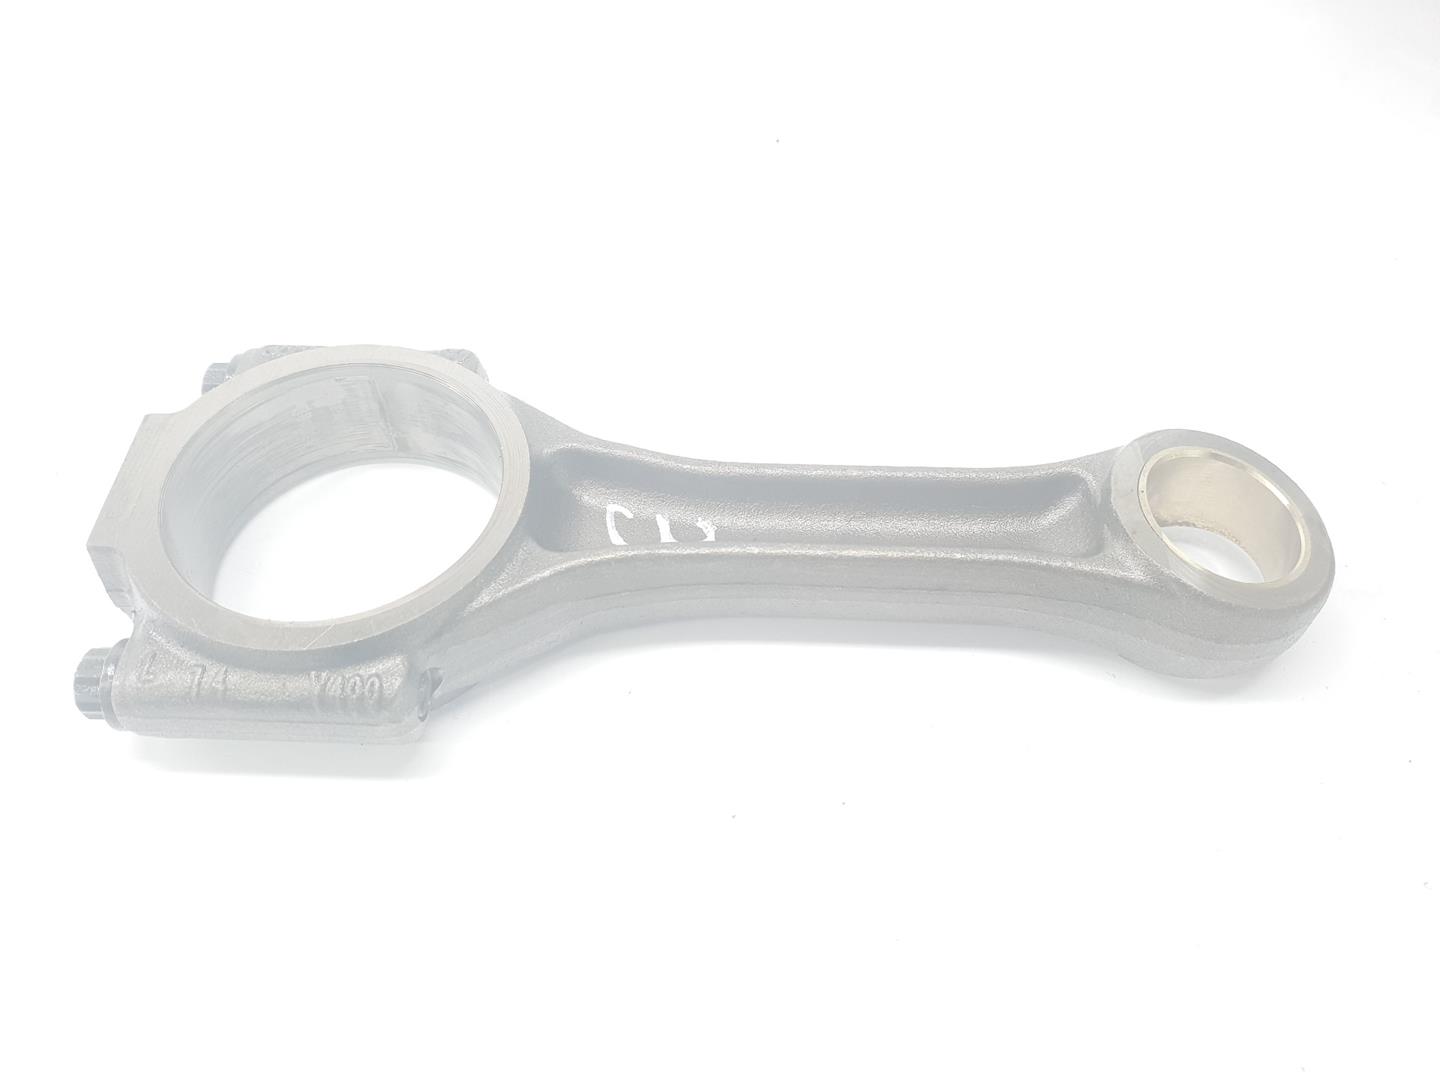 SEAT Exeo 1 generation (2009-2012) Connecting Rod 038198401F, 038198401F, 1111AA 22601981